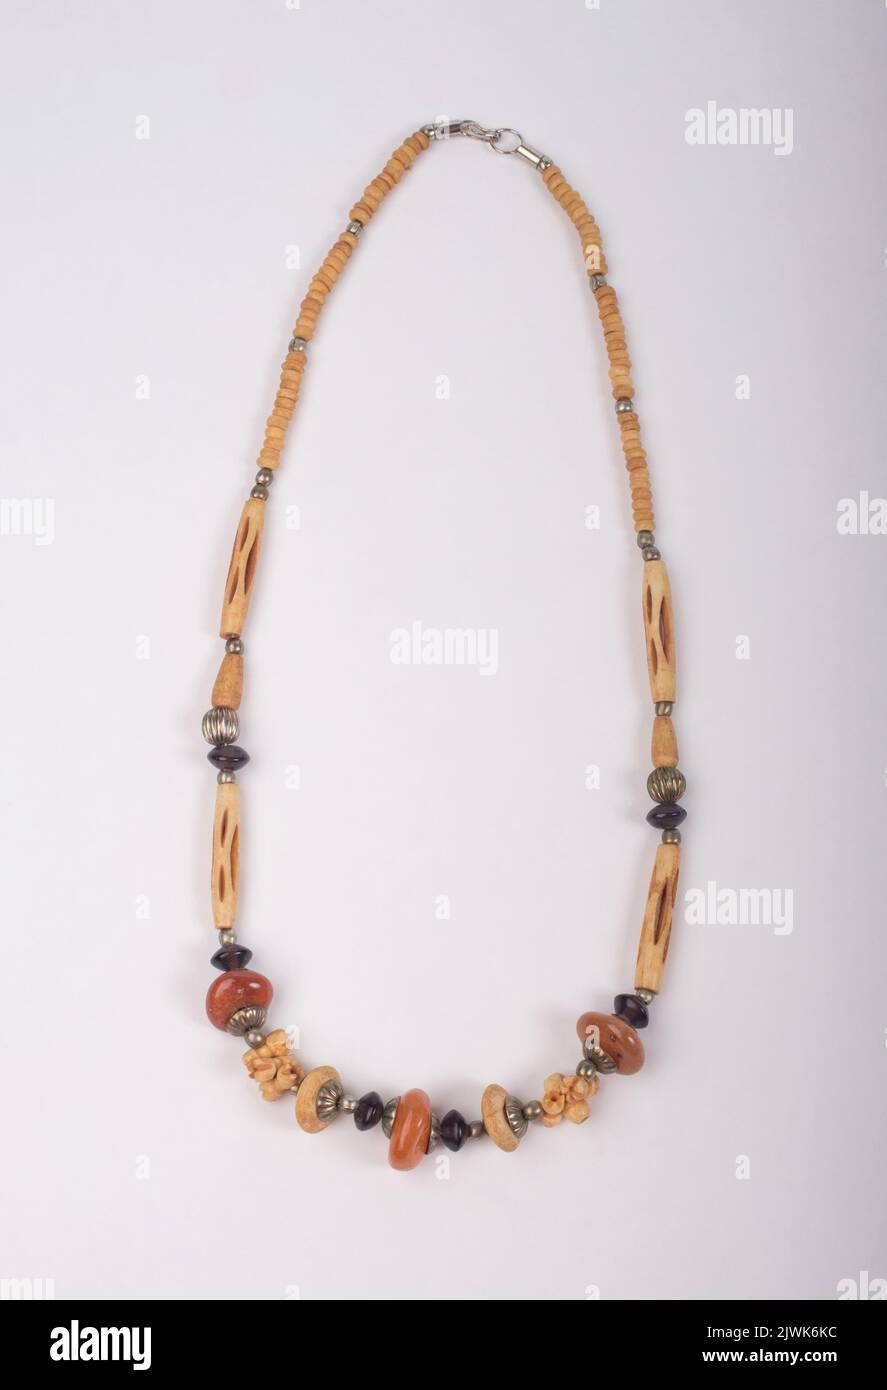 women necklace made of colored stone and bead, beautiful craft work for women accessories Stock Photo